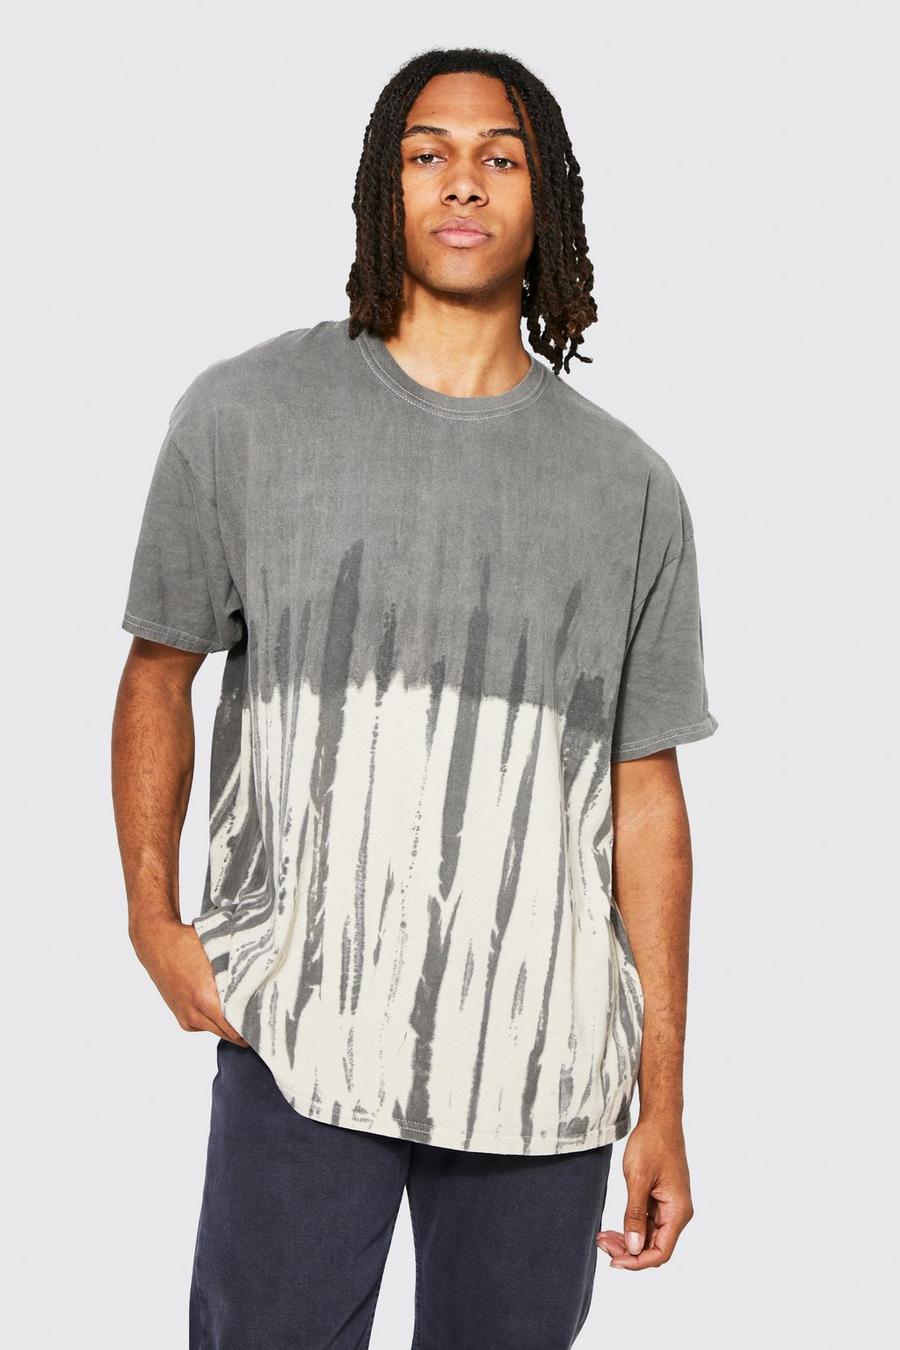 Charcoal grey Oversized Bleach Tie Dye T-shirt image number 1